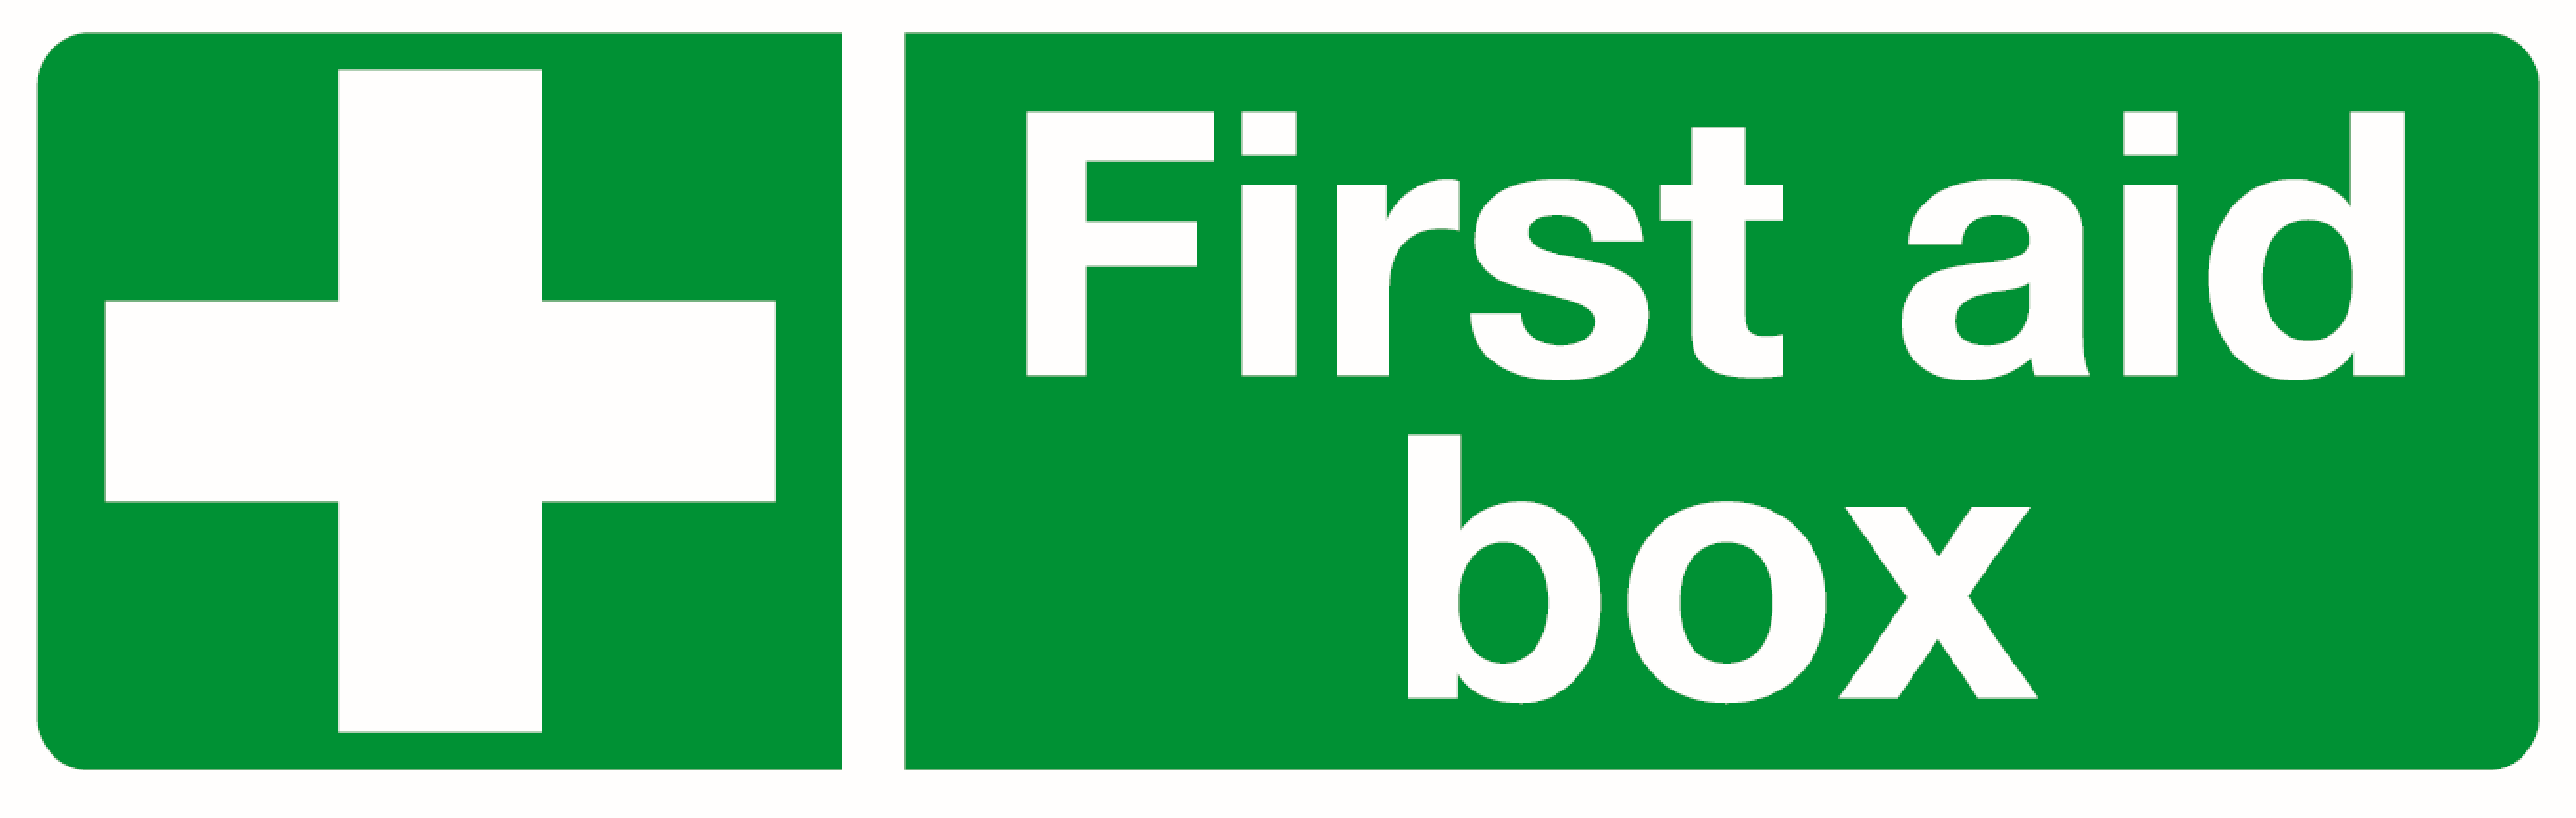 First Aid Box Logo - Free First Aid Sign, Download Free Clip Art, Free Clip Art on ...